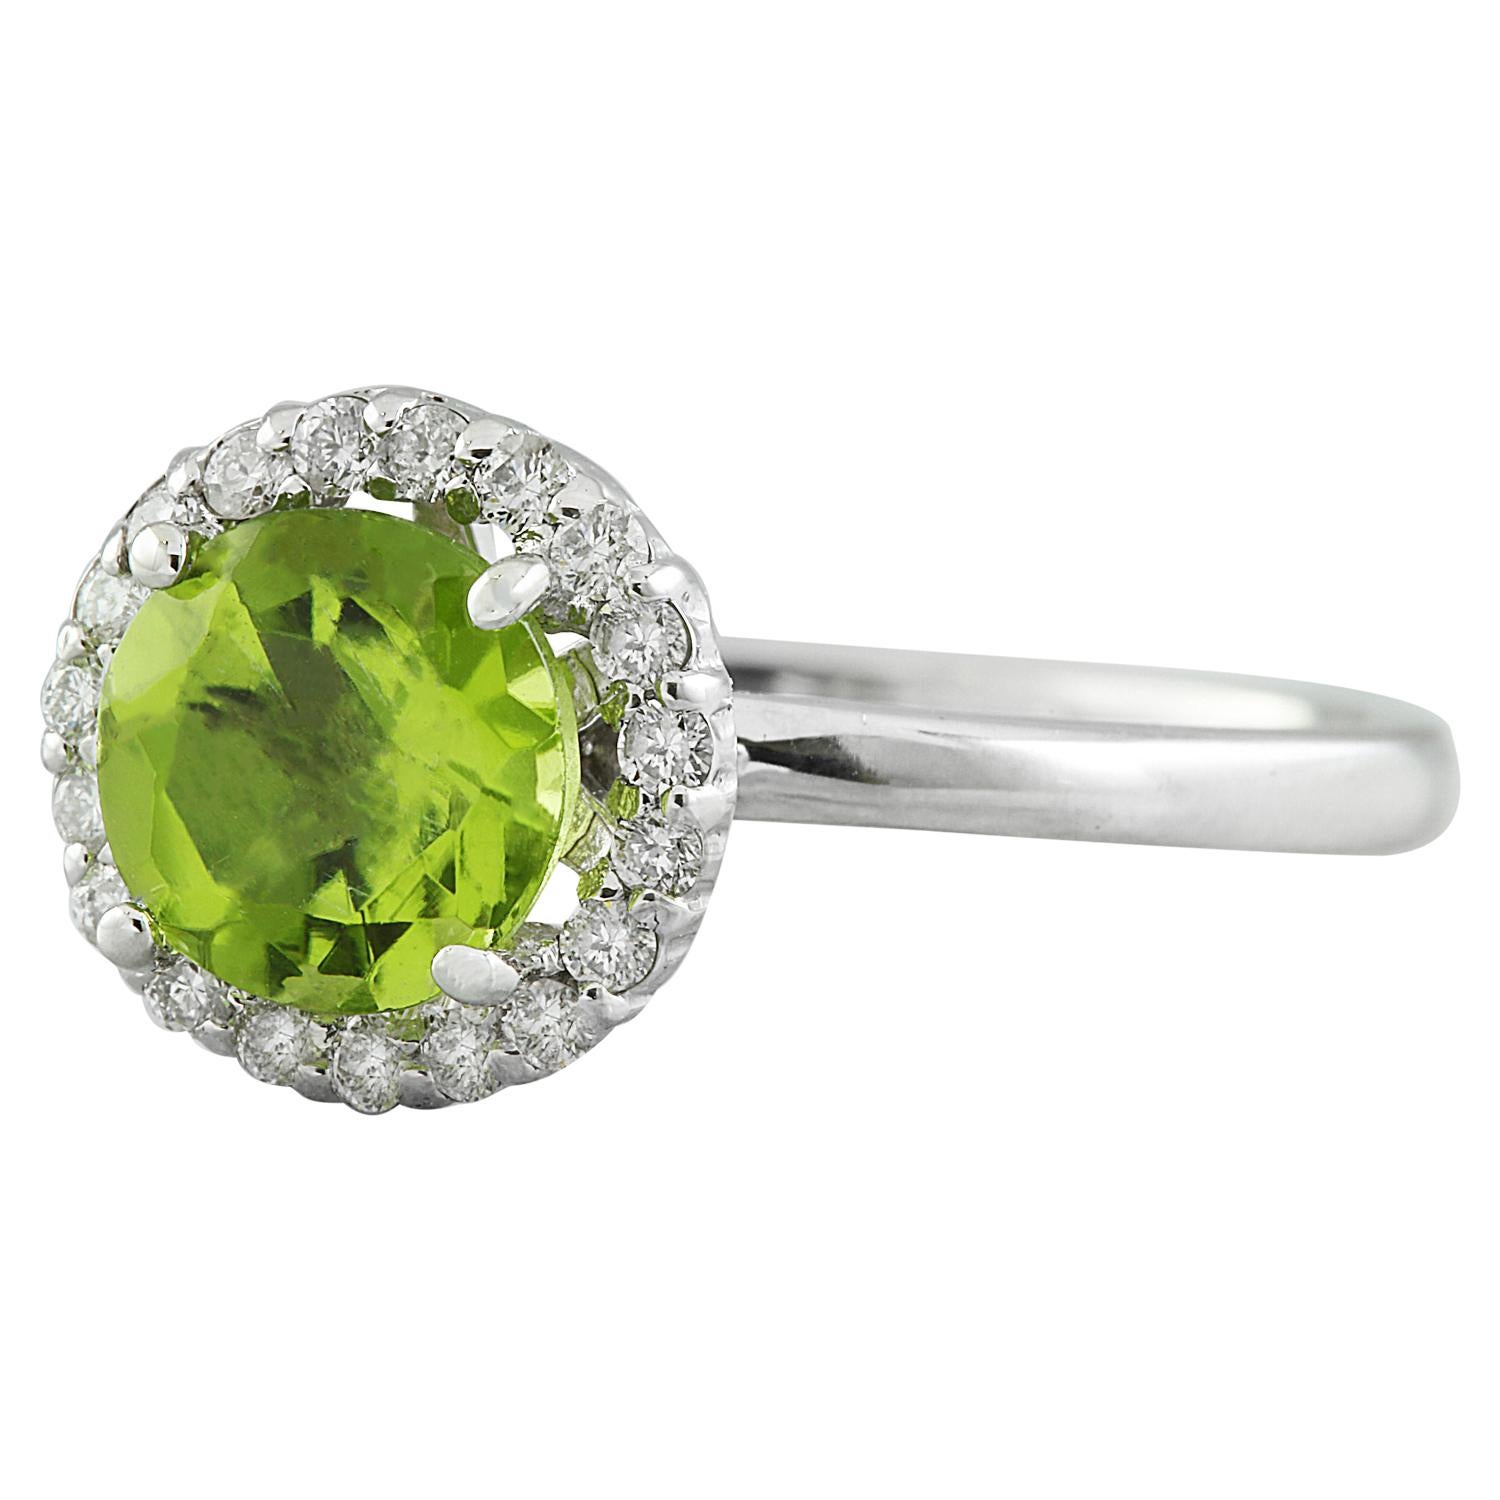 1.69 Carat Natural Peridot 14 Karat Solid White Gold Diamond Ring
Stamped: 14K 
Total Ring Weight: 2.4 Grams 
Peridot Weight: 1.49 Carat (7.00x7.00 Millimeters)  
Diamond Weight: 0.20 carat (F-G Color, VS2-SI1 Clarity )
quantity: 19
Face Measures: